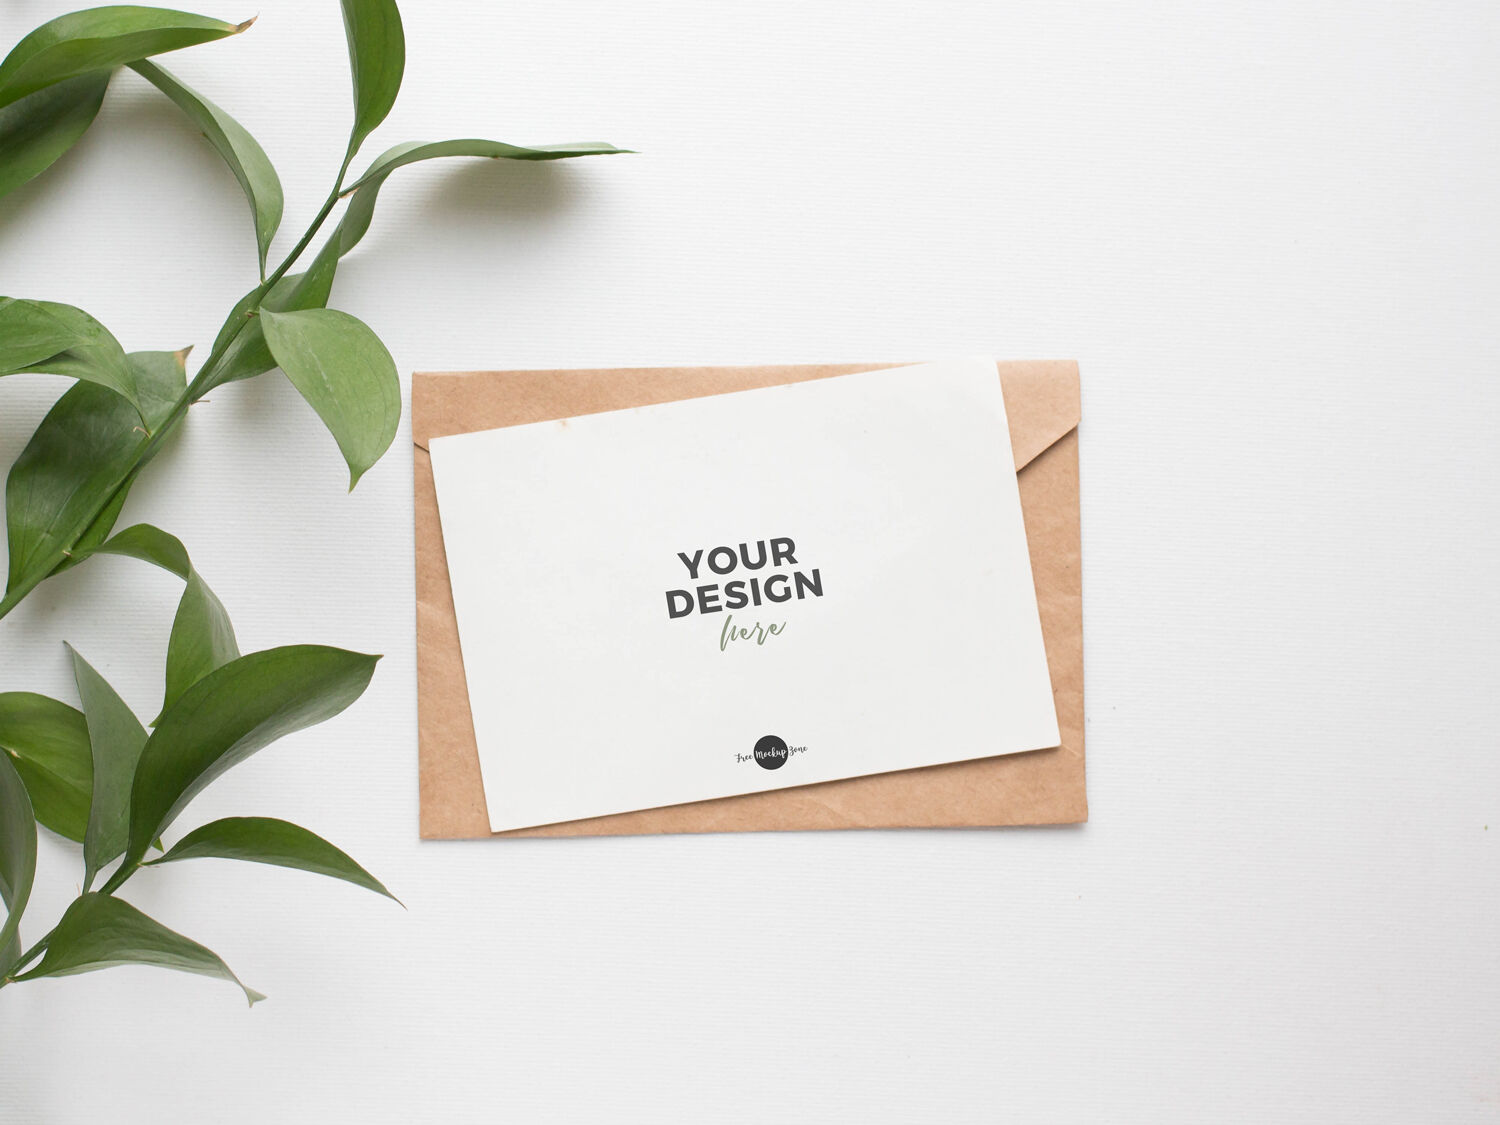 Free Top View Card With Envelope Stationery Mockup Design - Mockup Planet